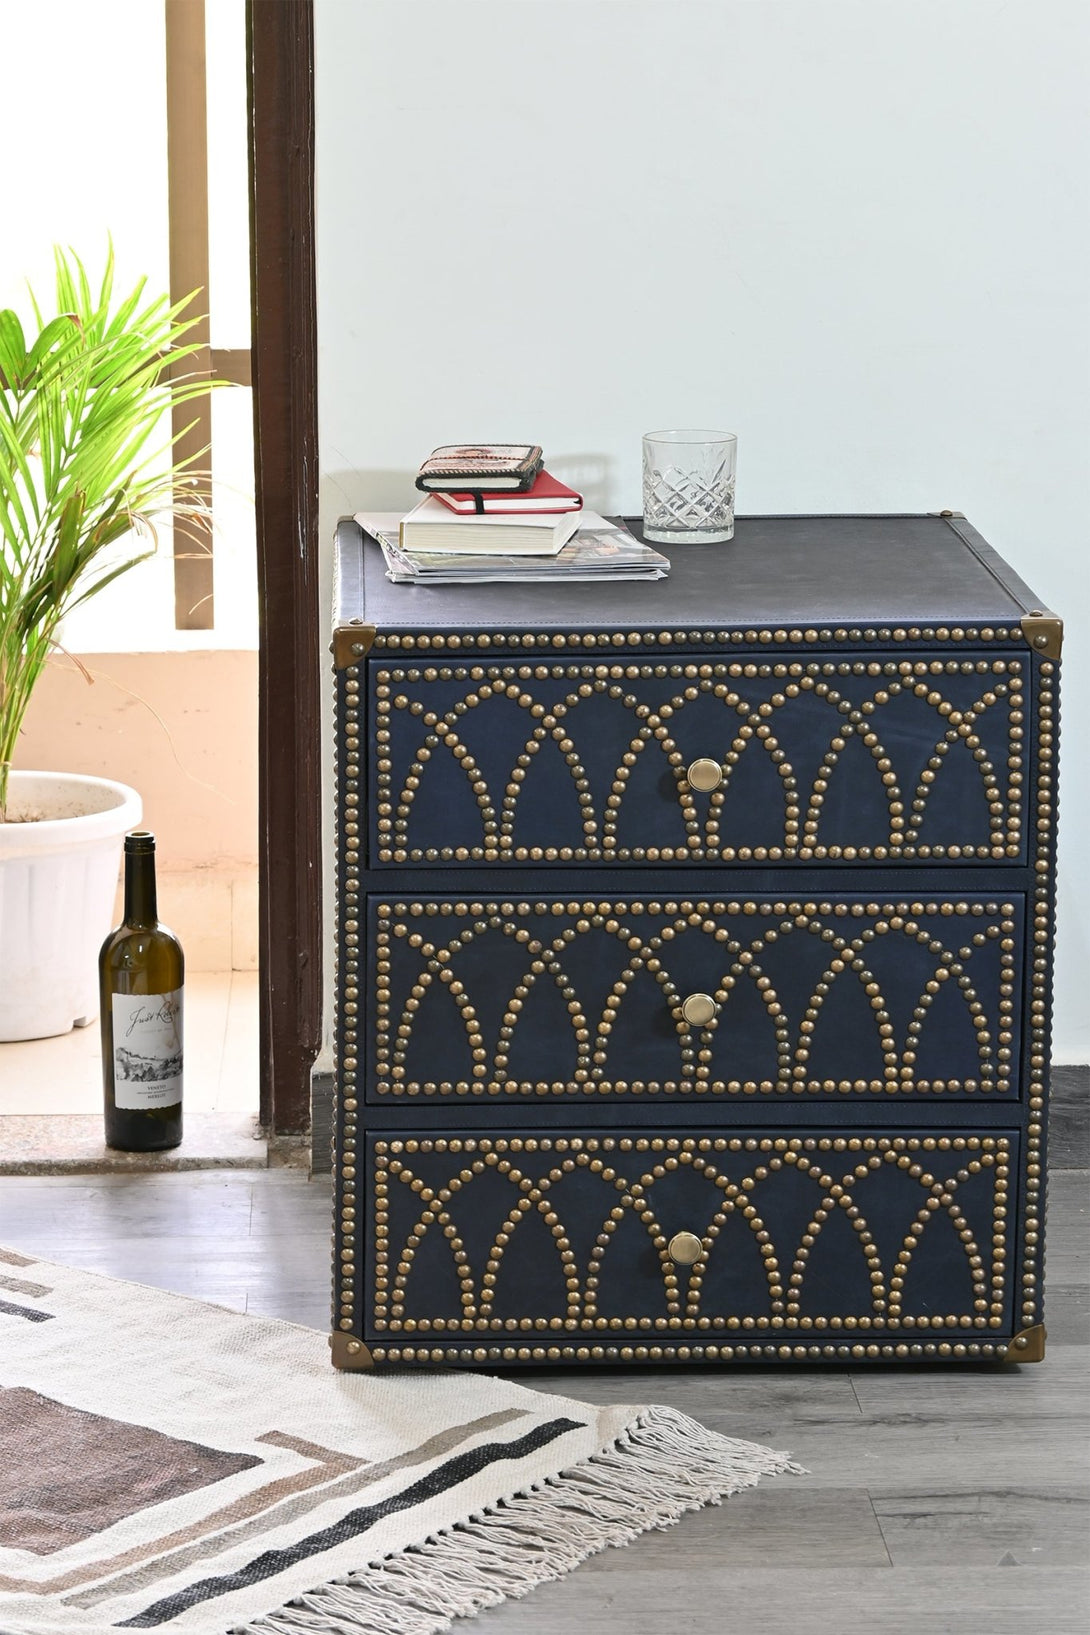 AMY - CHEST OF DRAWERS - LEATHER - ART AVENUE